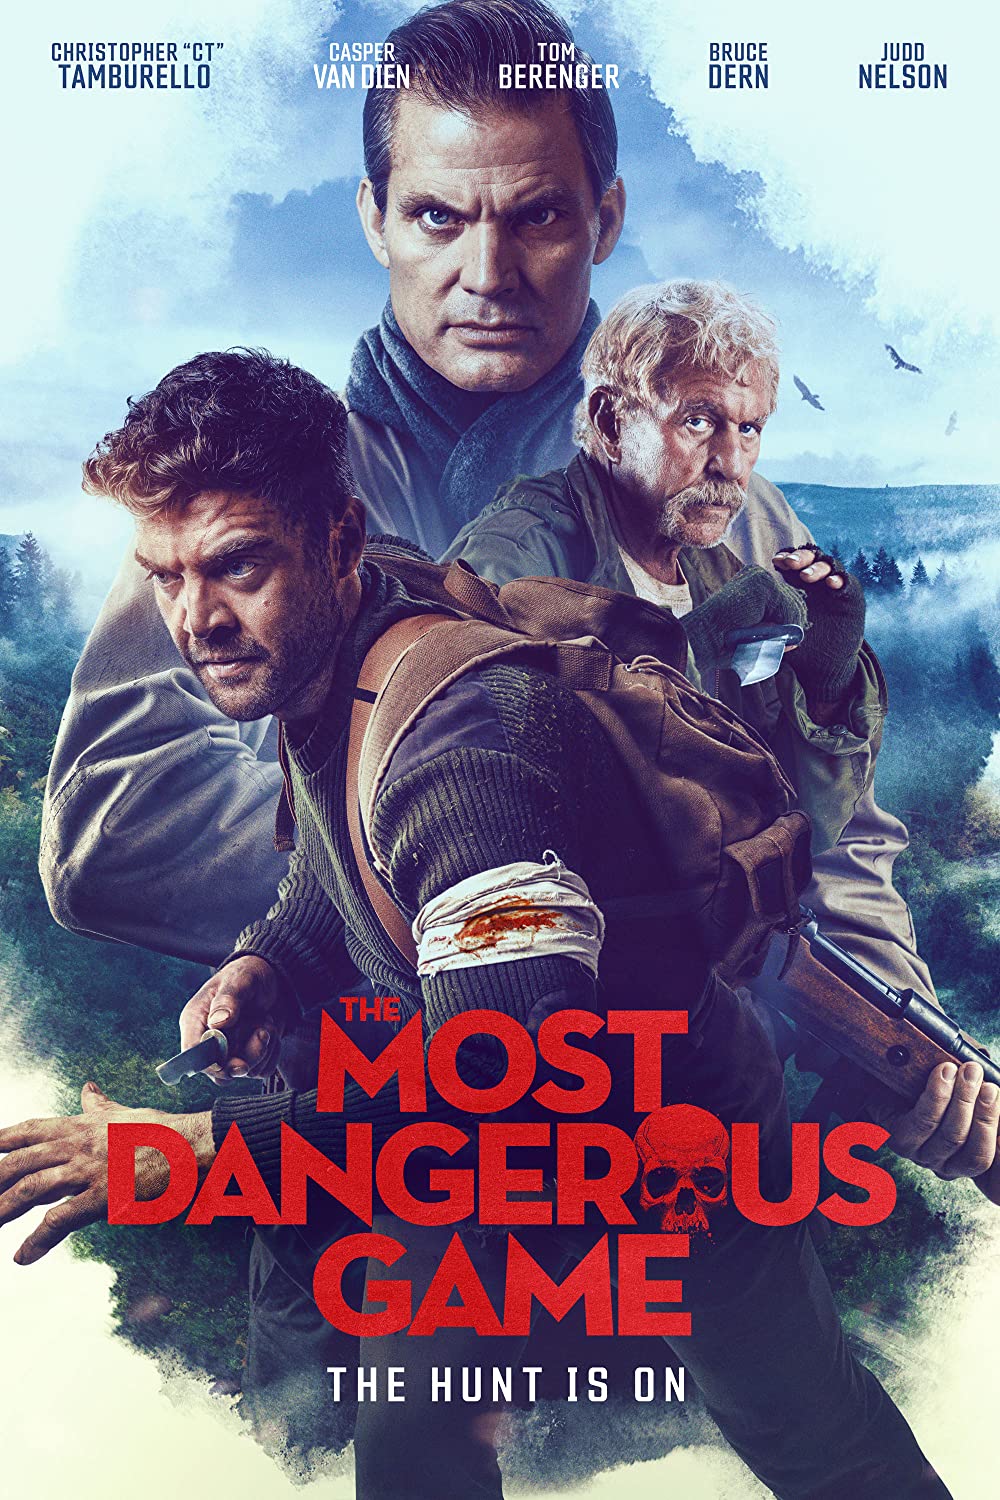 The Most Dangerous Game 2022 English 720p HDRip ESub 800MB Download